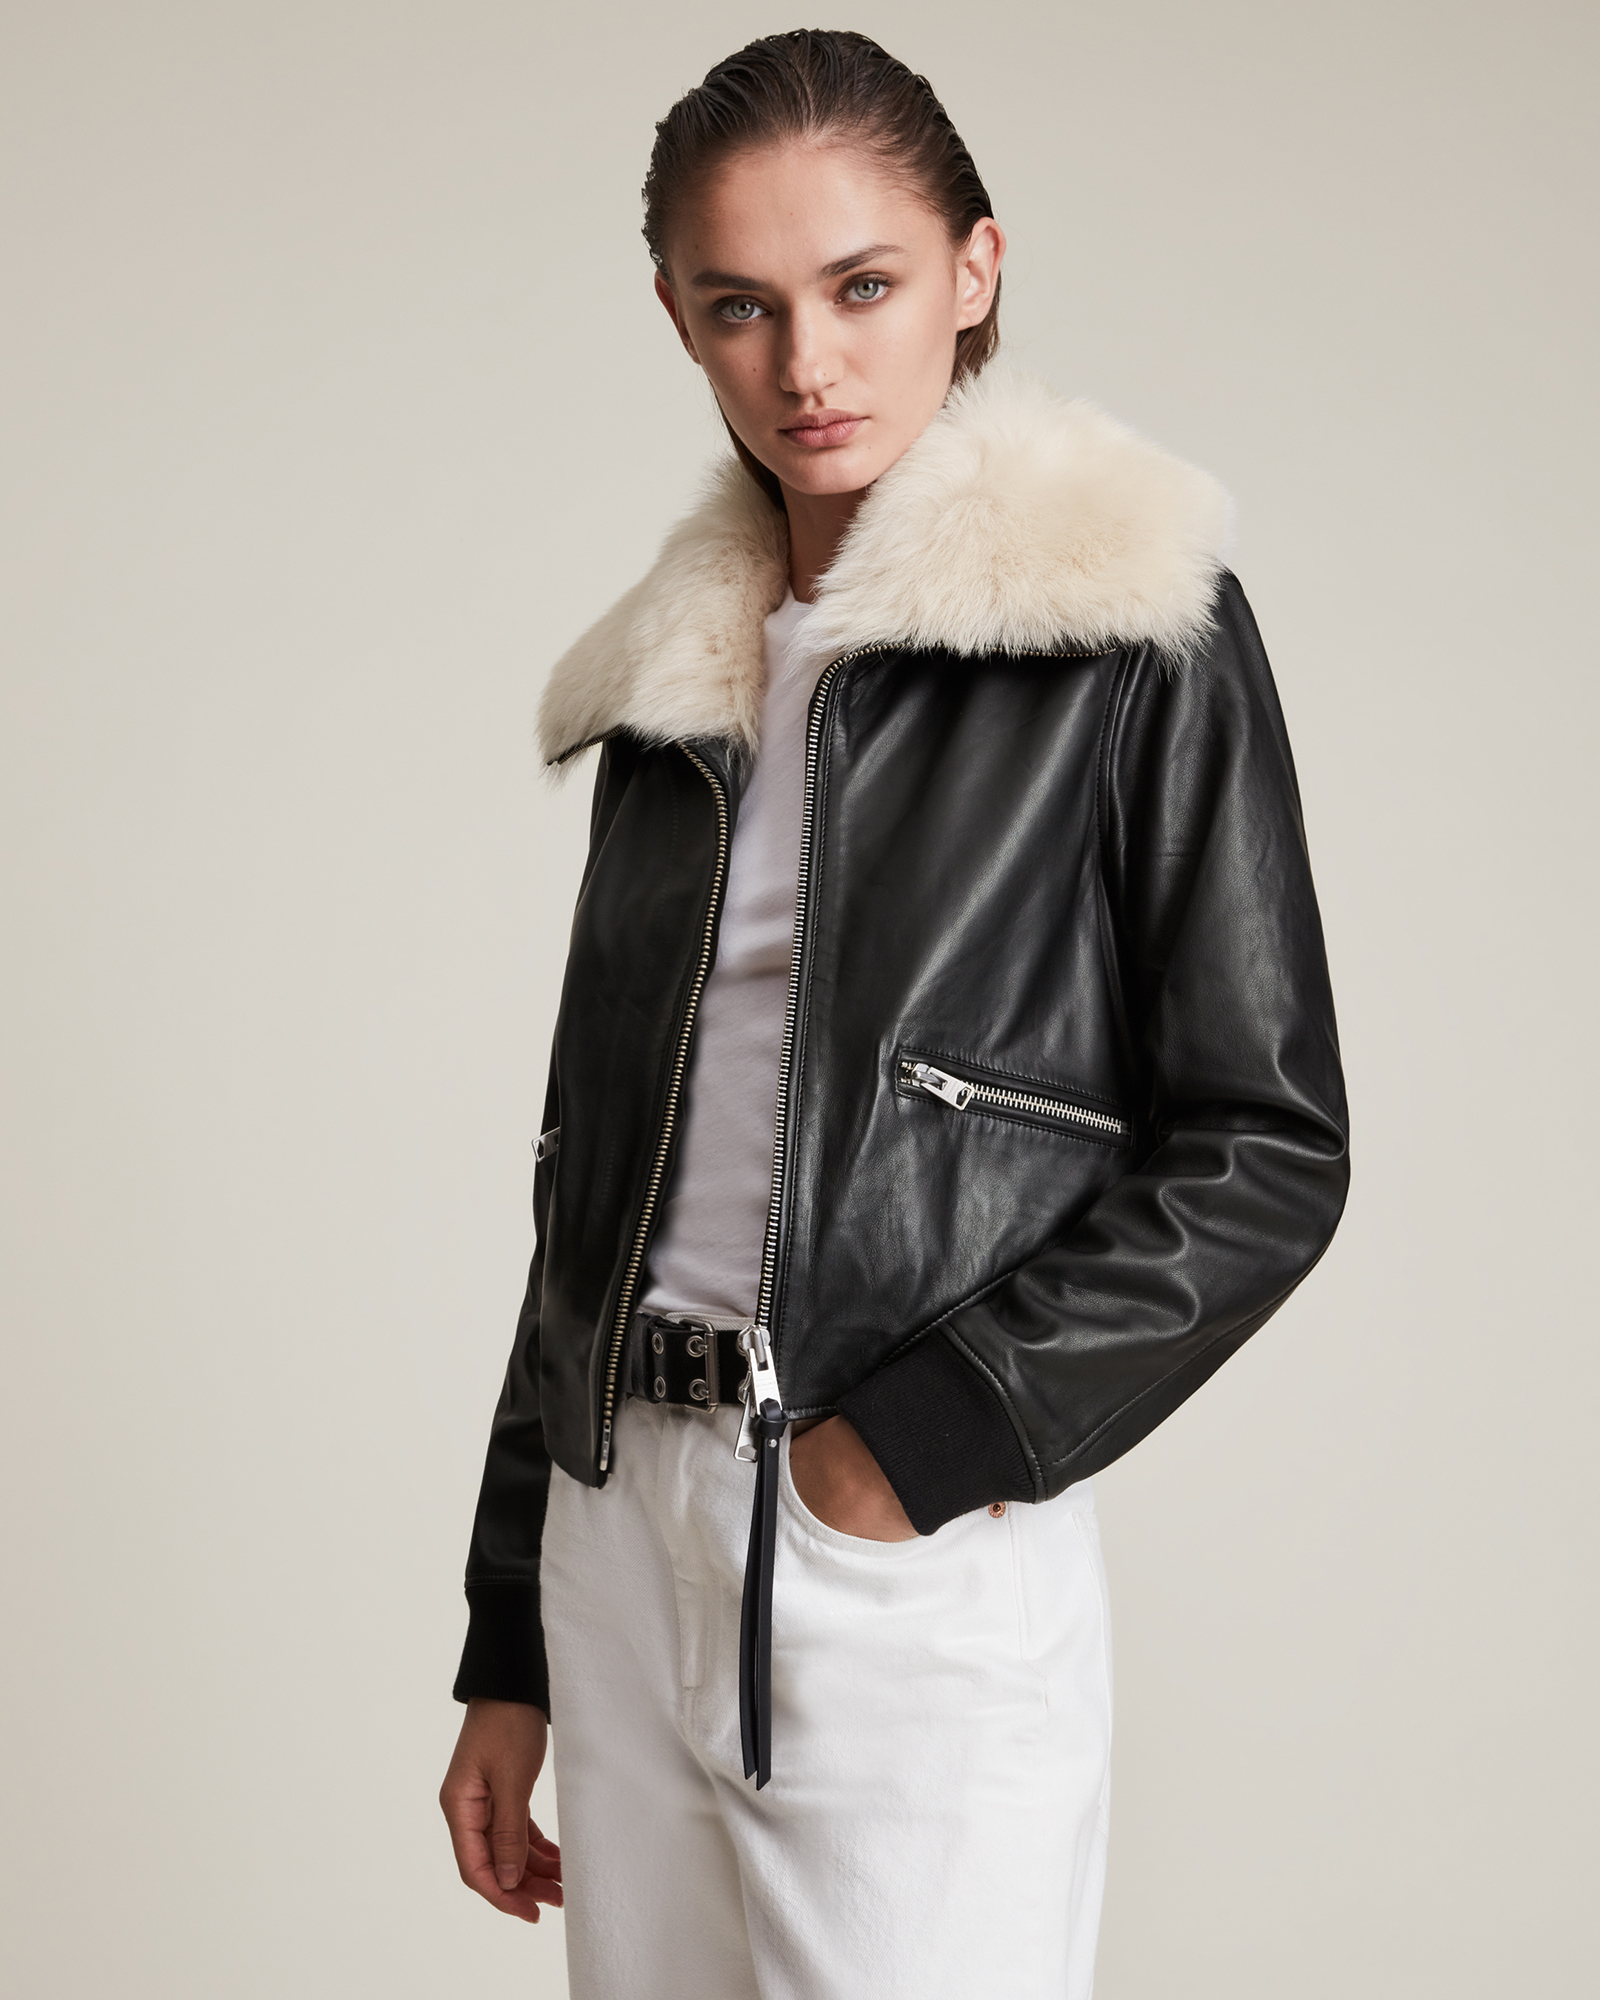 Wisley Shearling Leather Jacket BLACK/OFF WHITE | ALLSAINTS